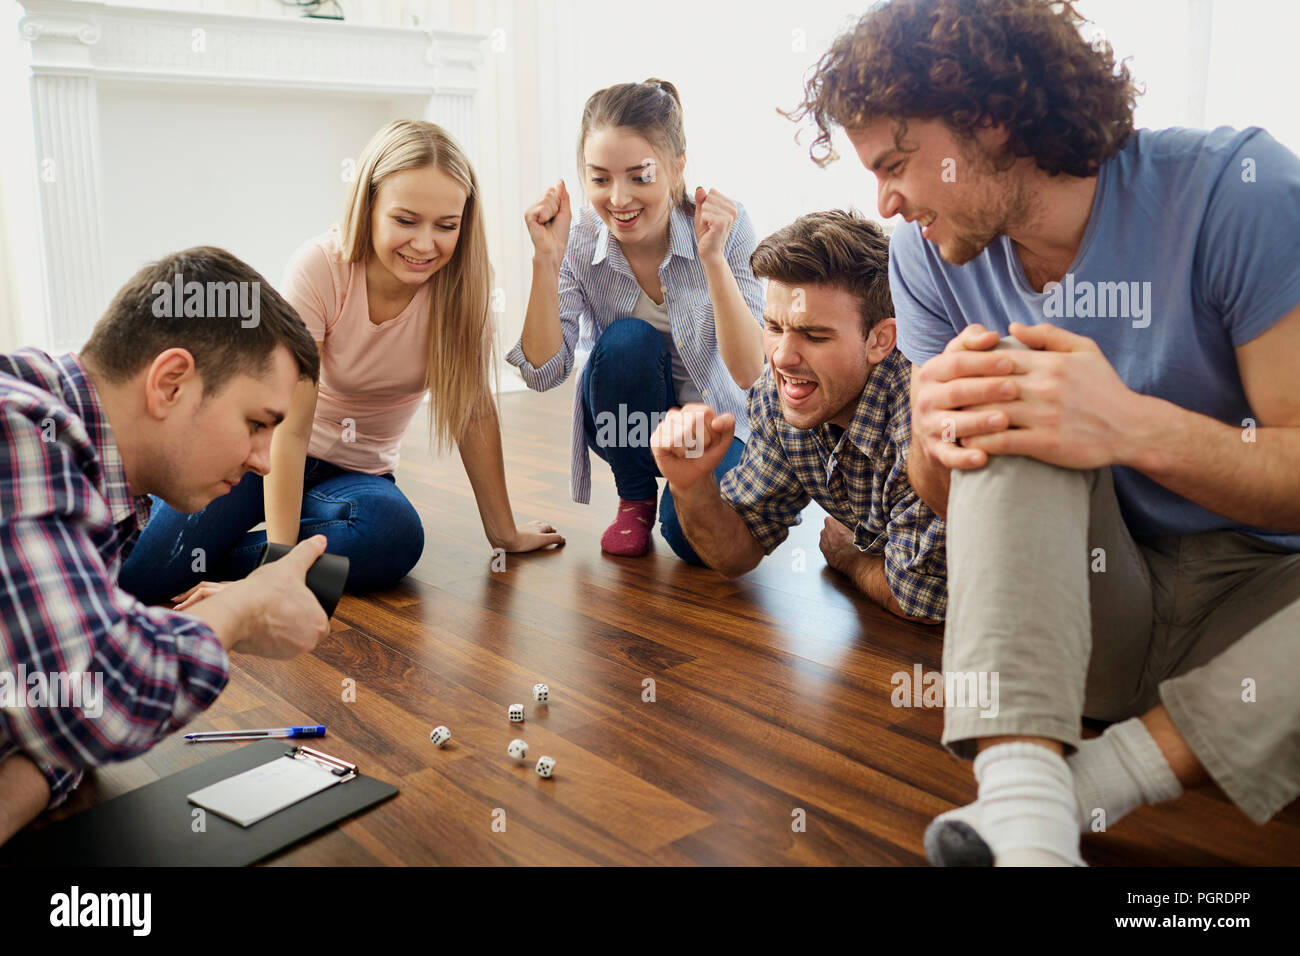 A Group Of Friends Play Board Games On The Floor Indoors Stock Photo